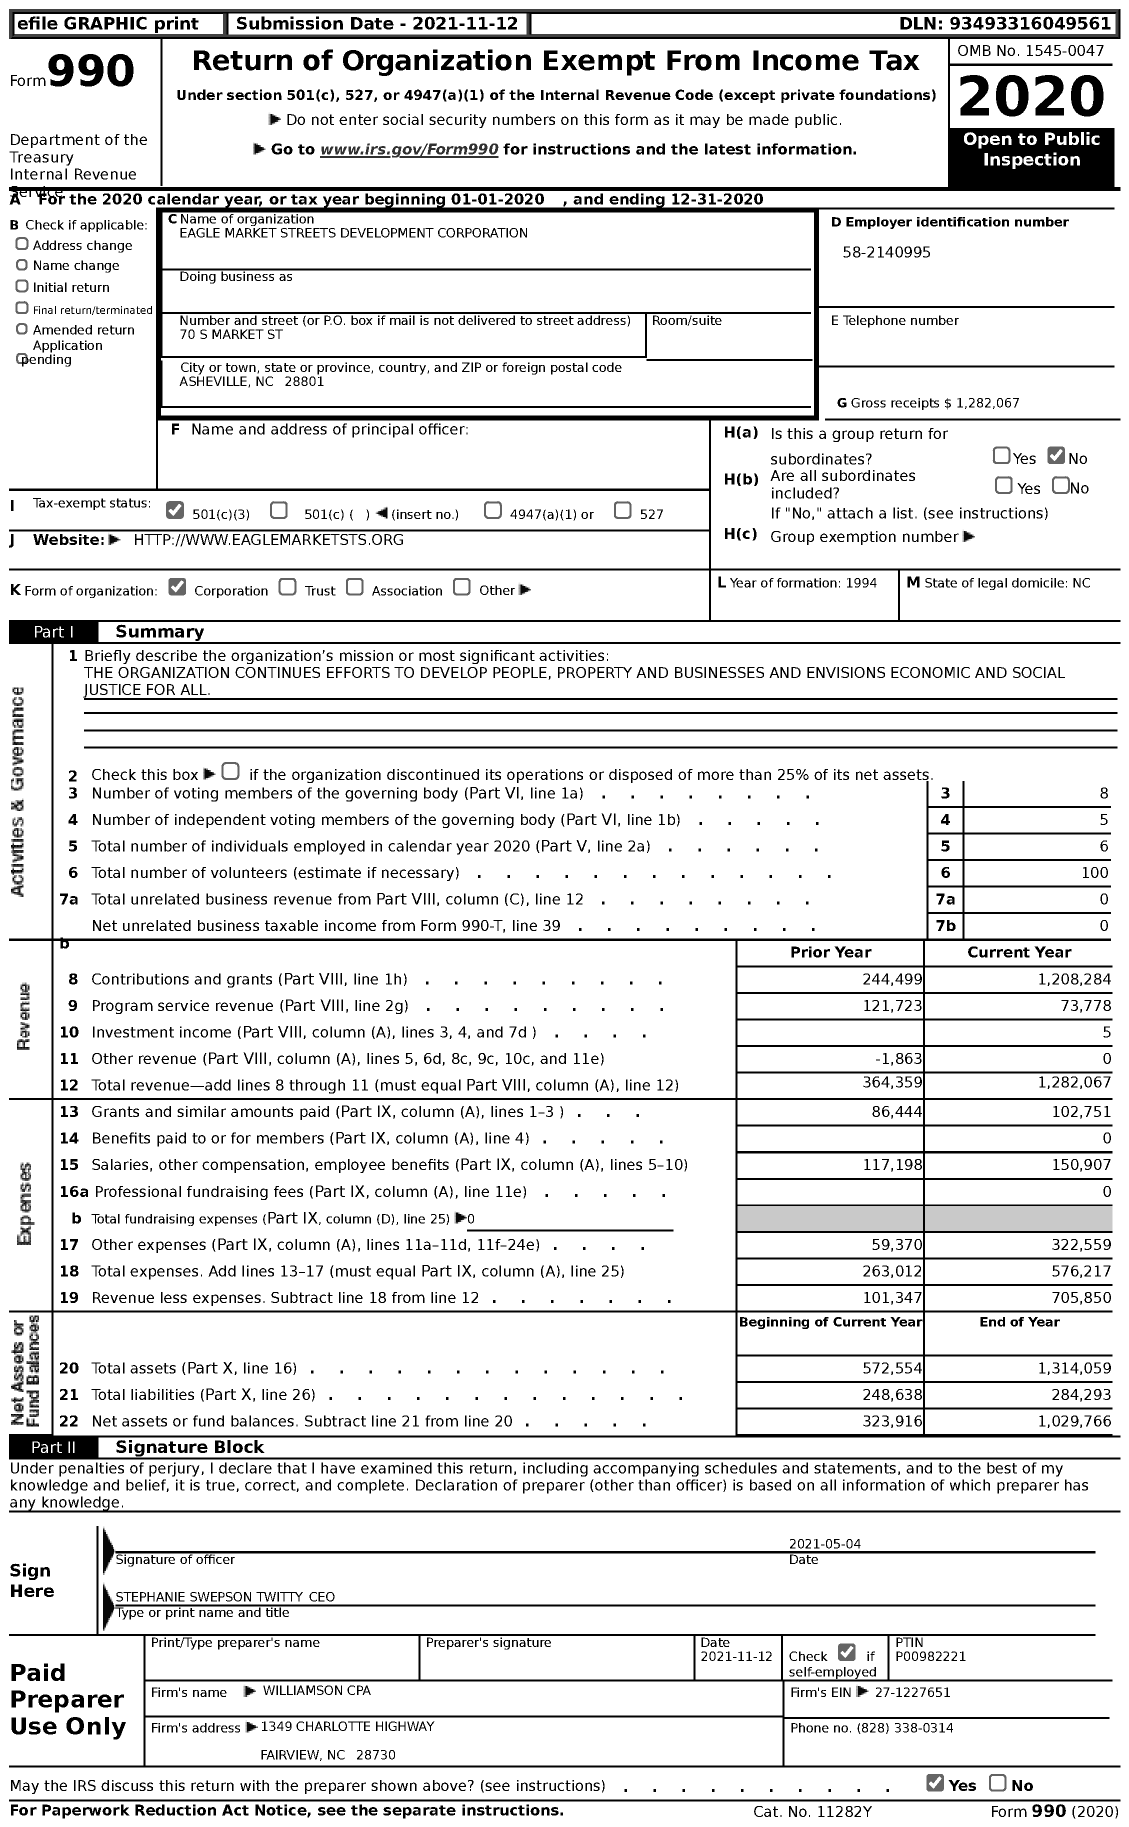 Image of first page of 2020 Form 990 for Eagle Market Streets Development Corporation (EMSDC)